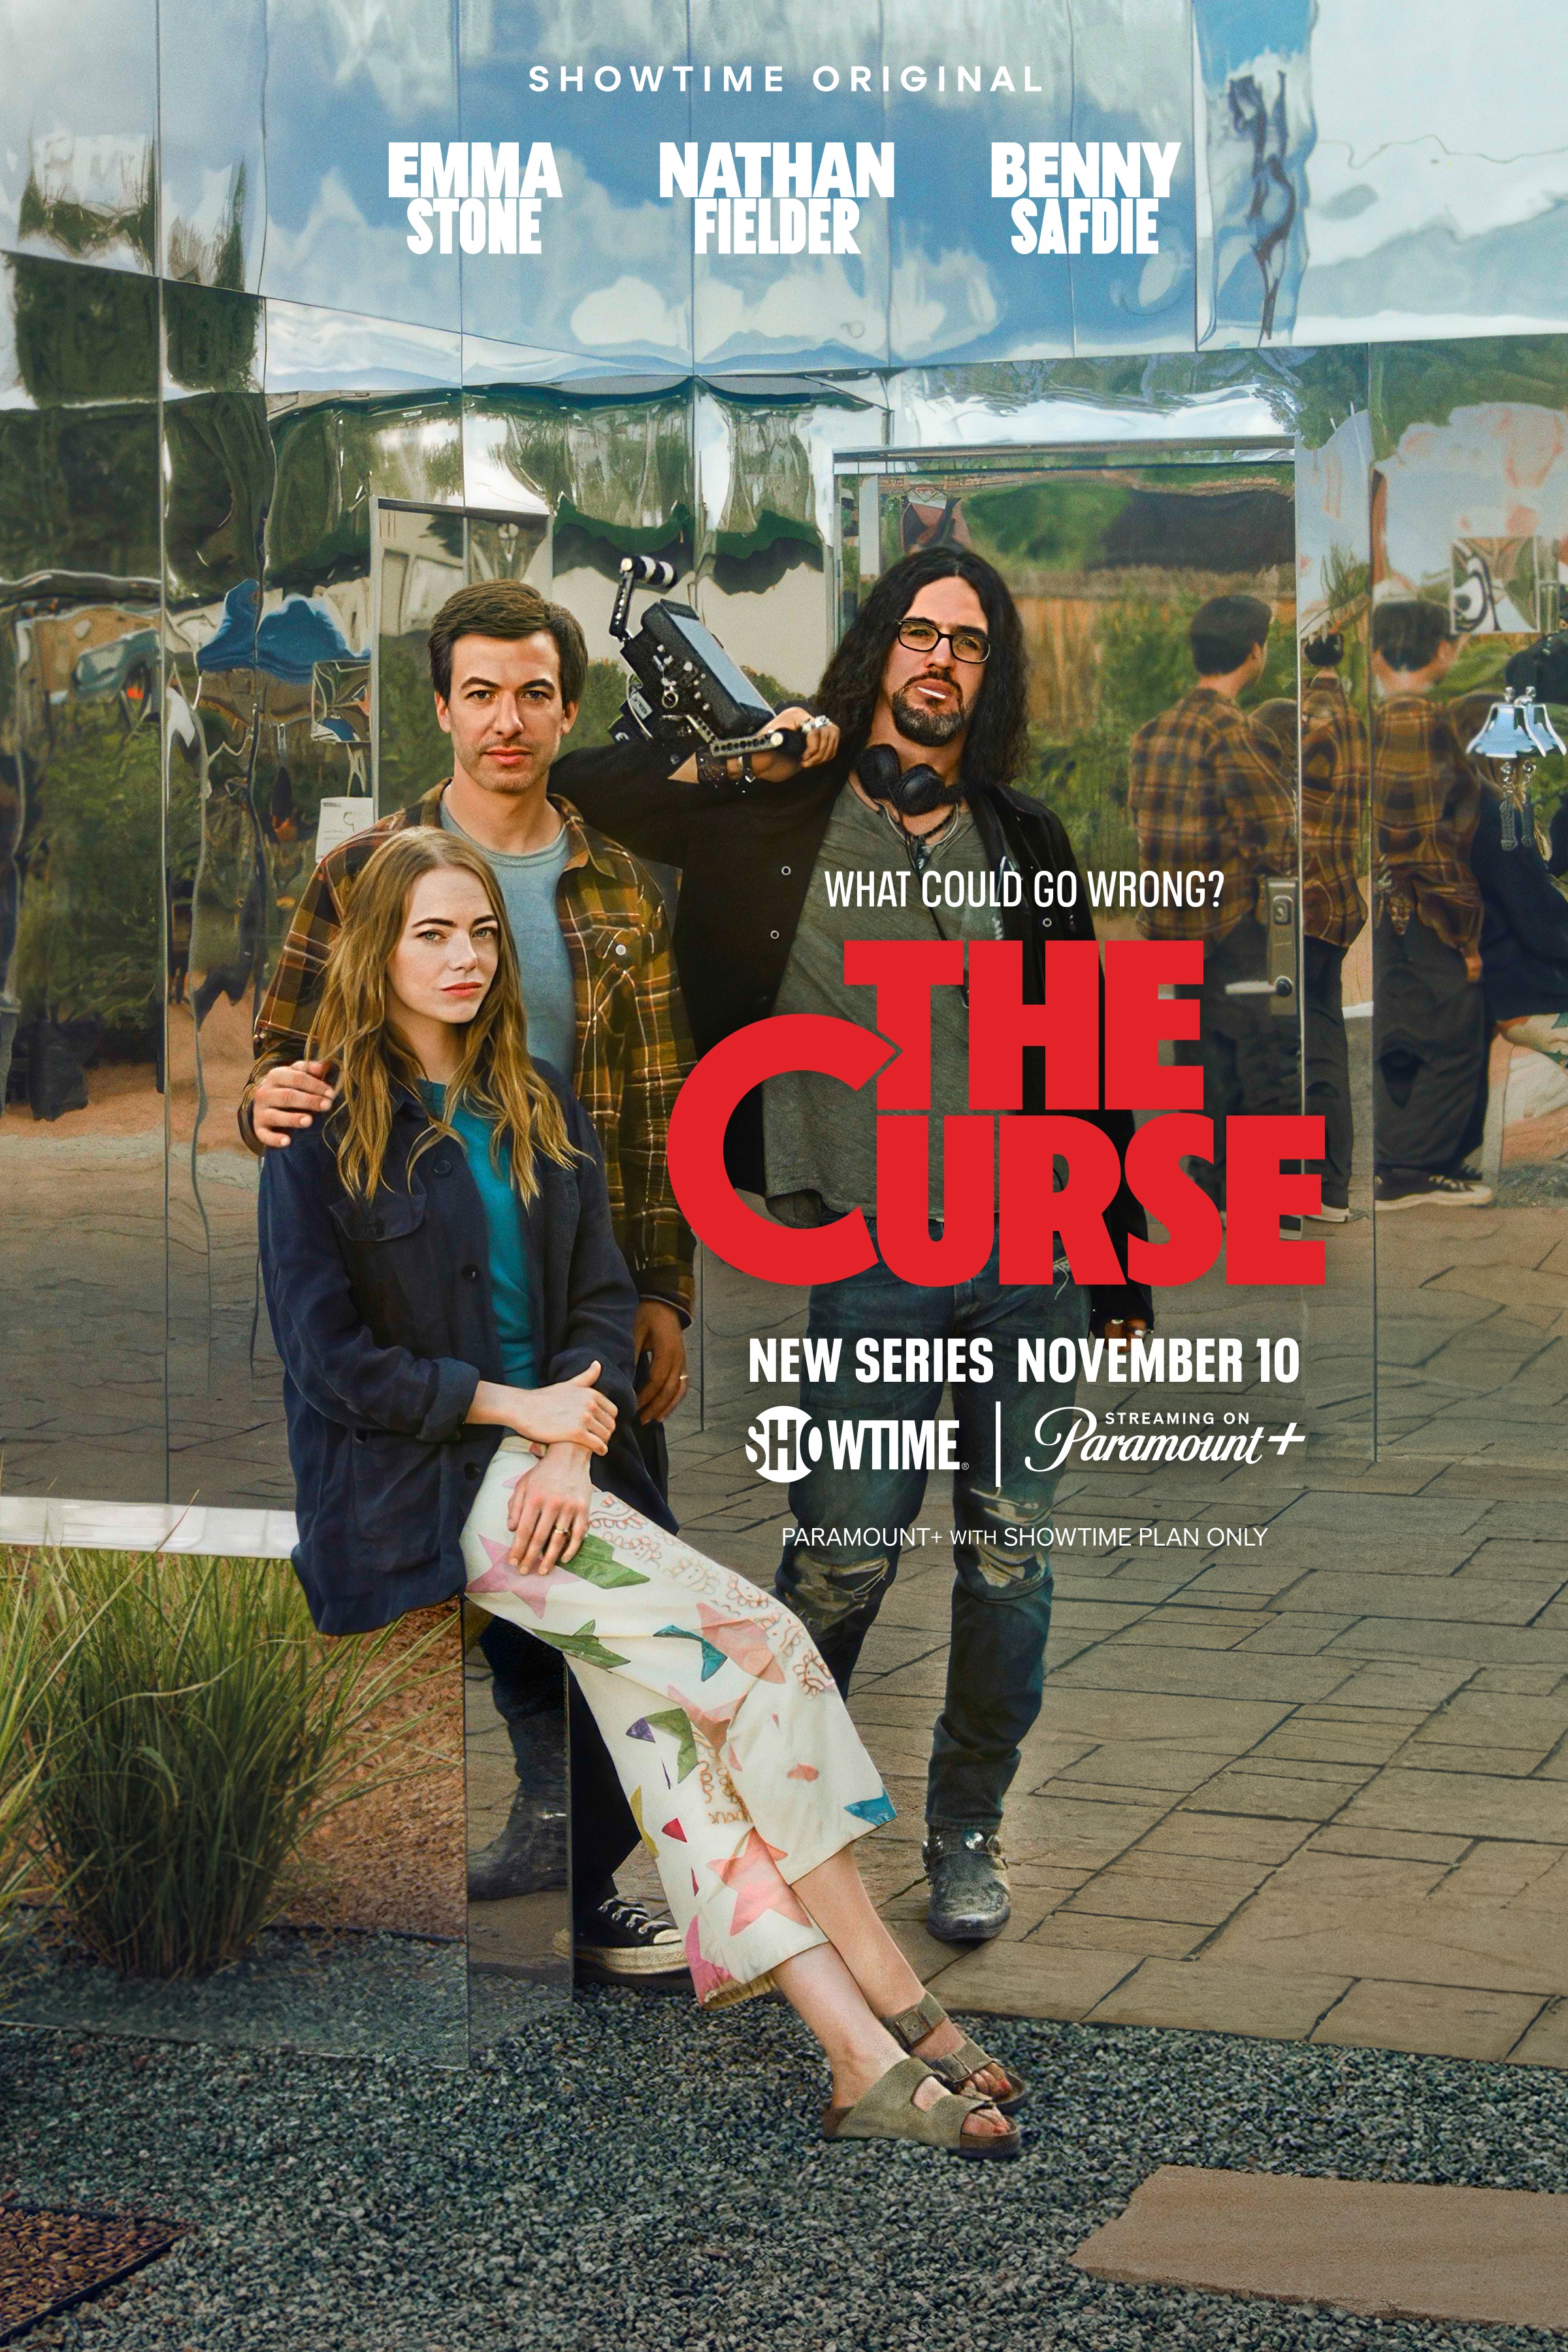 About The Curse on Paramount Plus